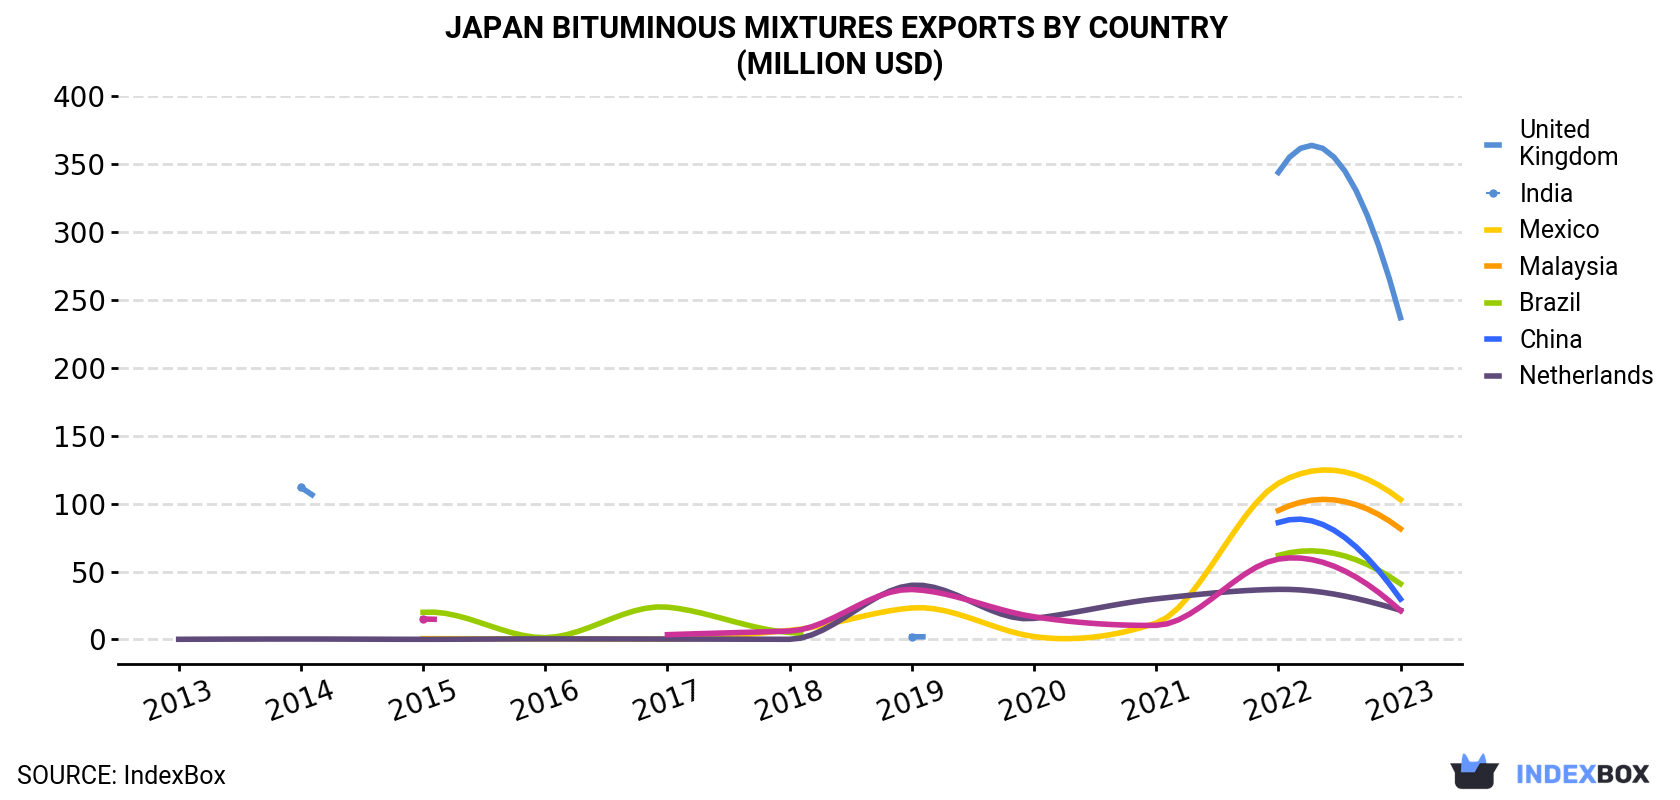 Japan Bituminous Mixtures Exports By Country (Million USD)